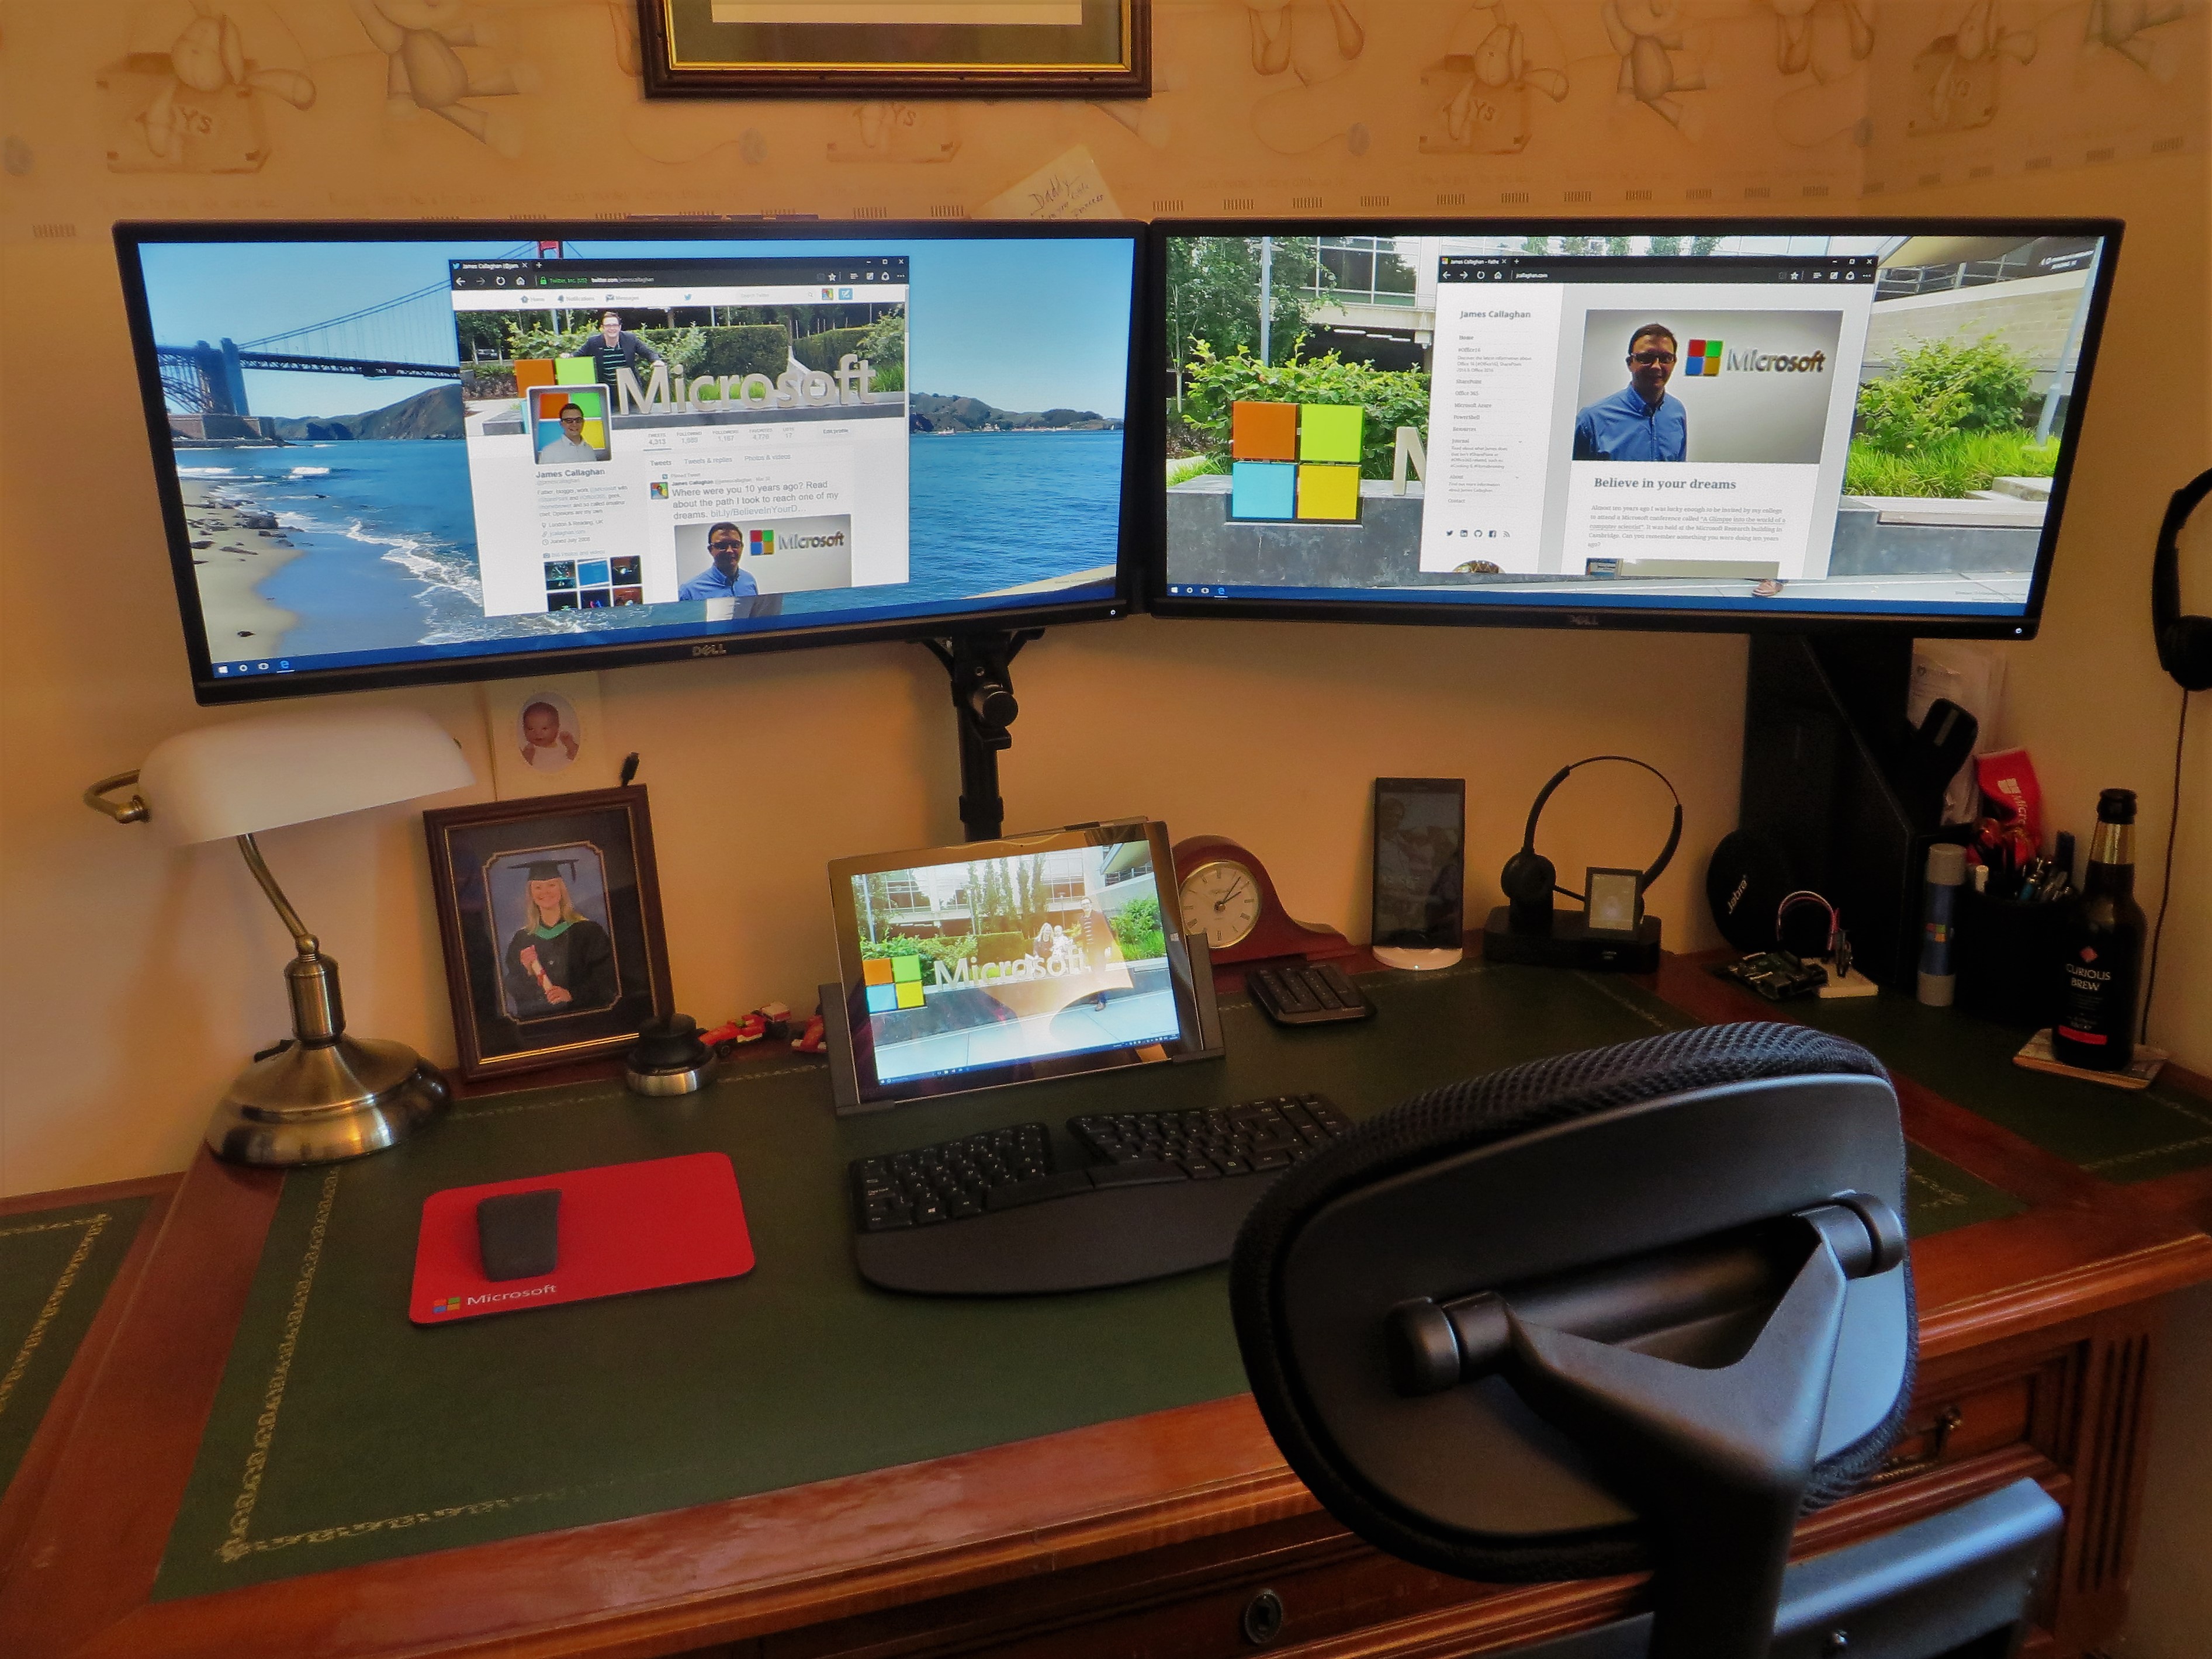 How to daisy chain multiple monitors on a Surface Pro 3 running Windows 10  James Callaghan